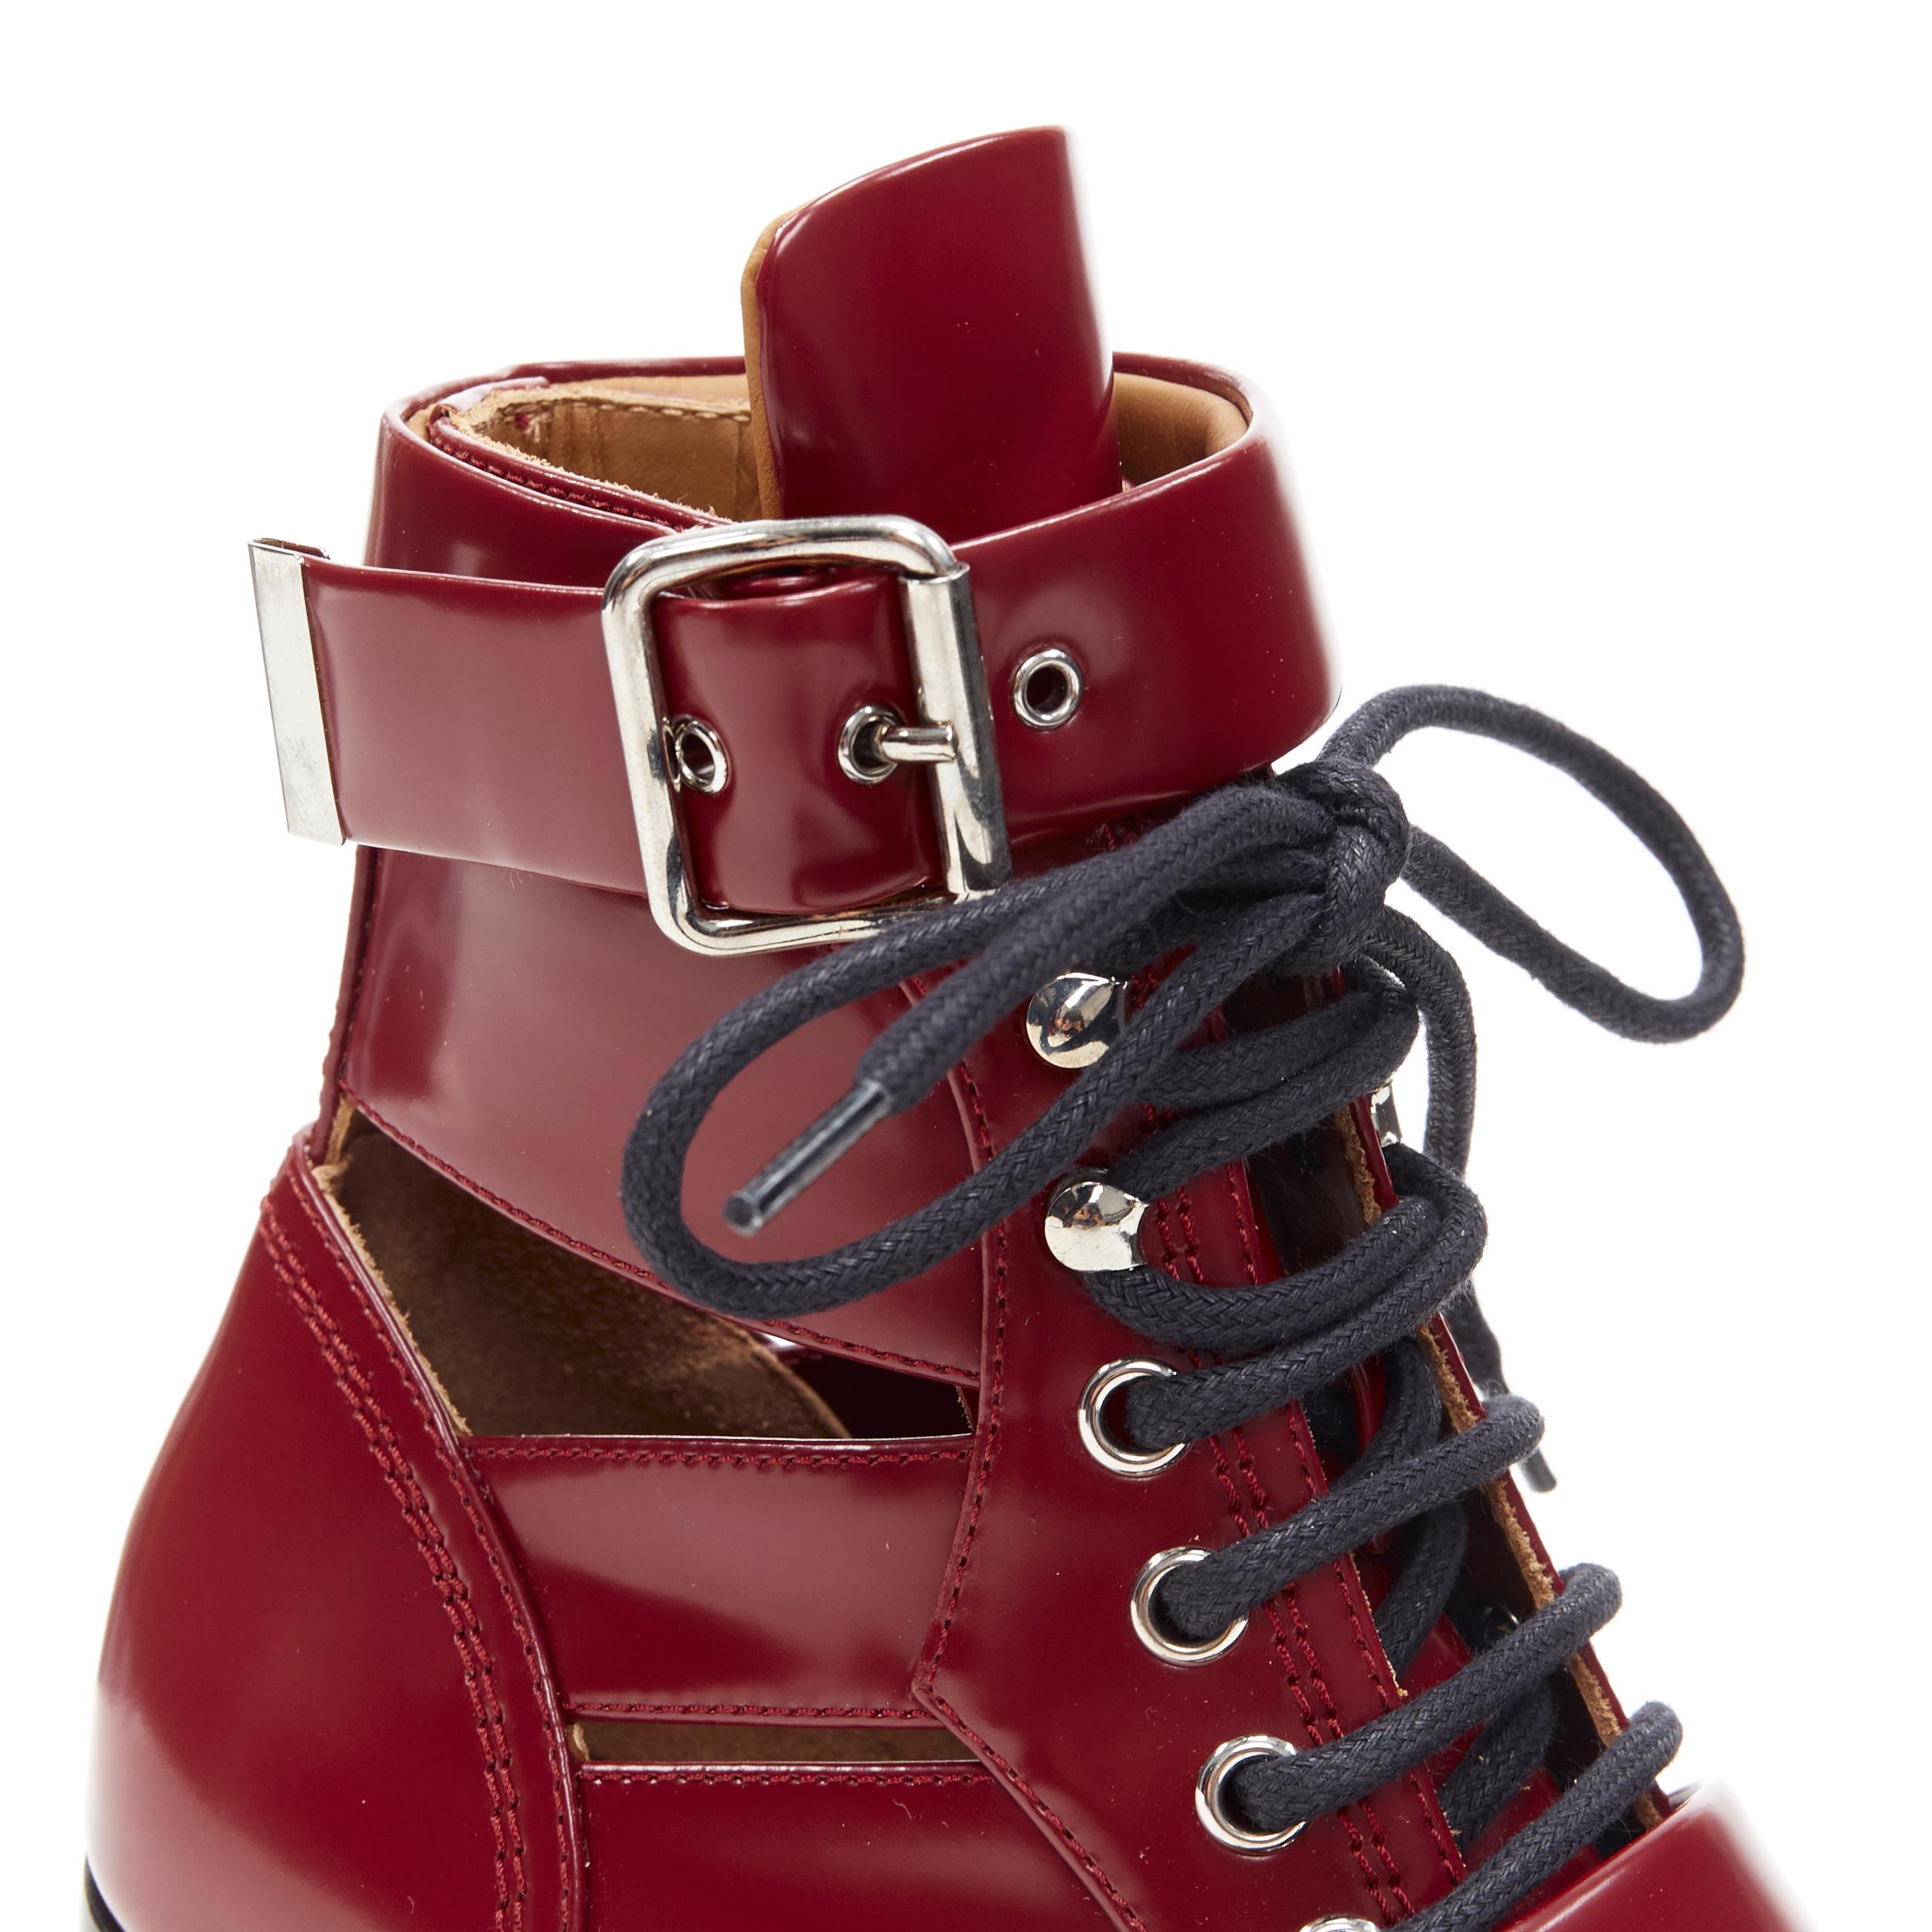 new CHLOE Rylee burgundy red leather cut out buckled pointy ankle boot EU38 4